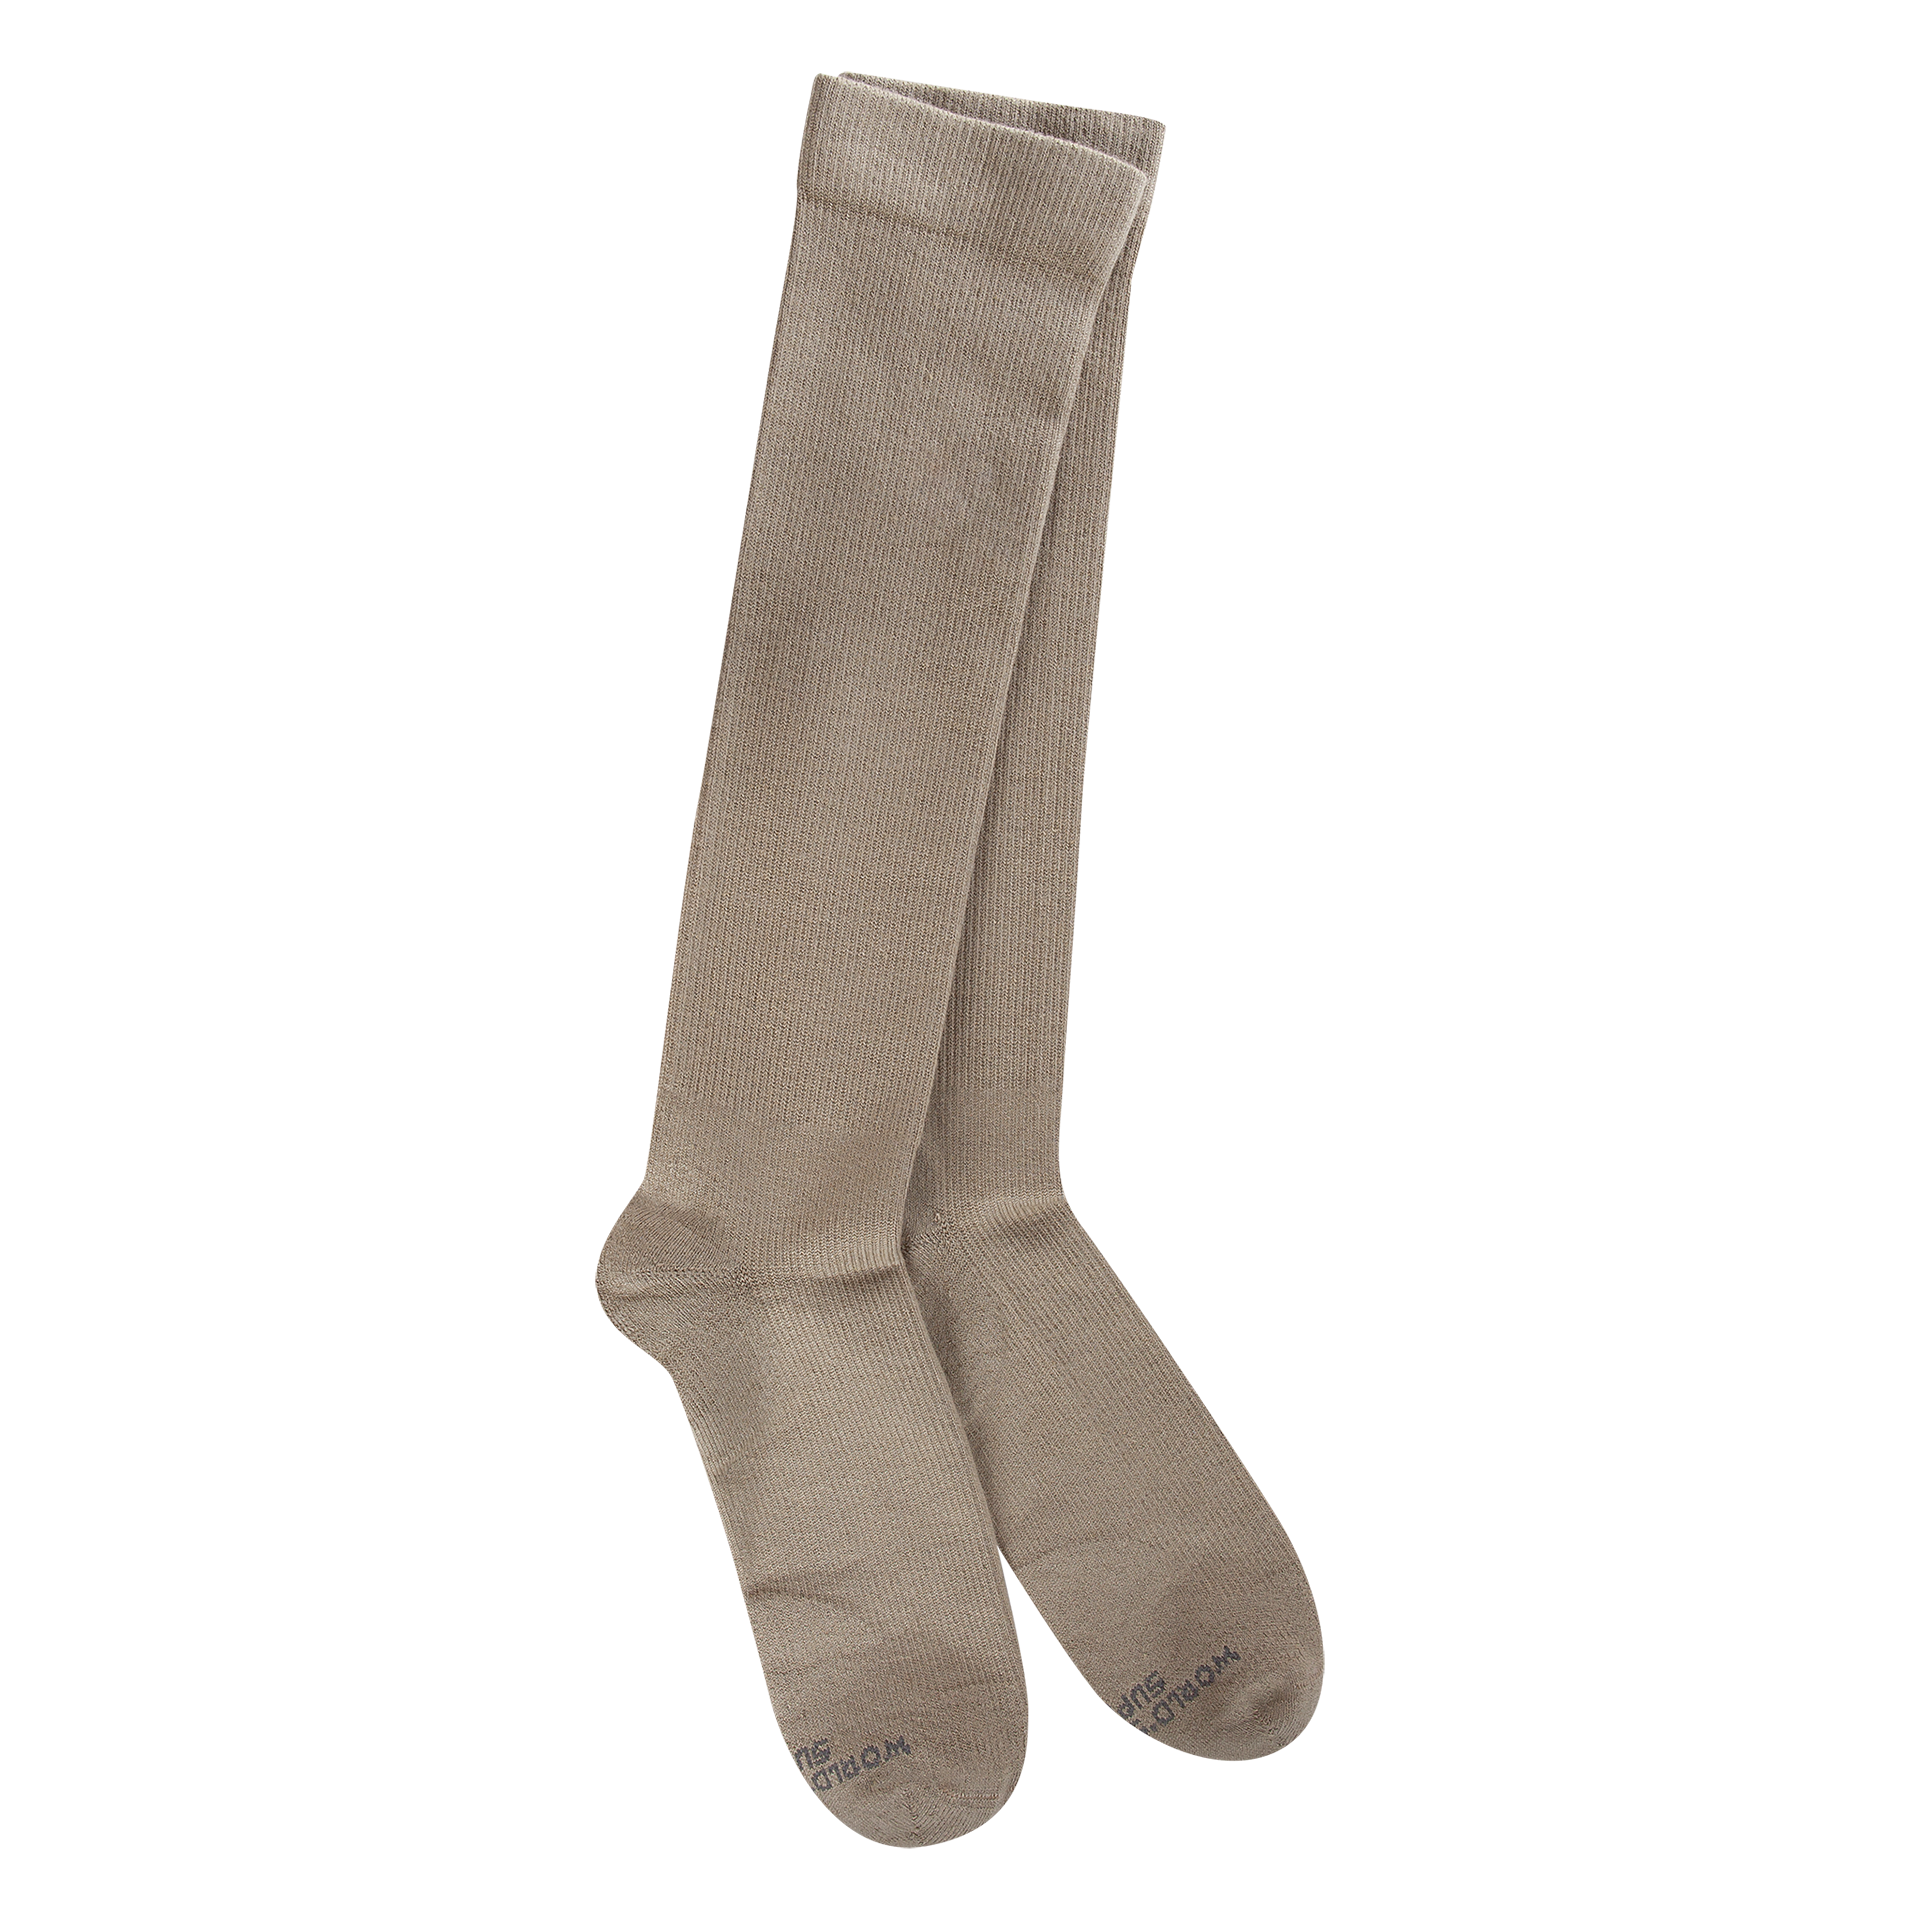 Support Fit Over-the-calf Khaki